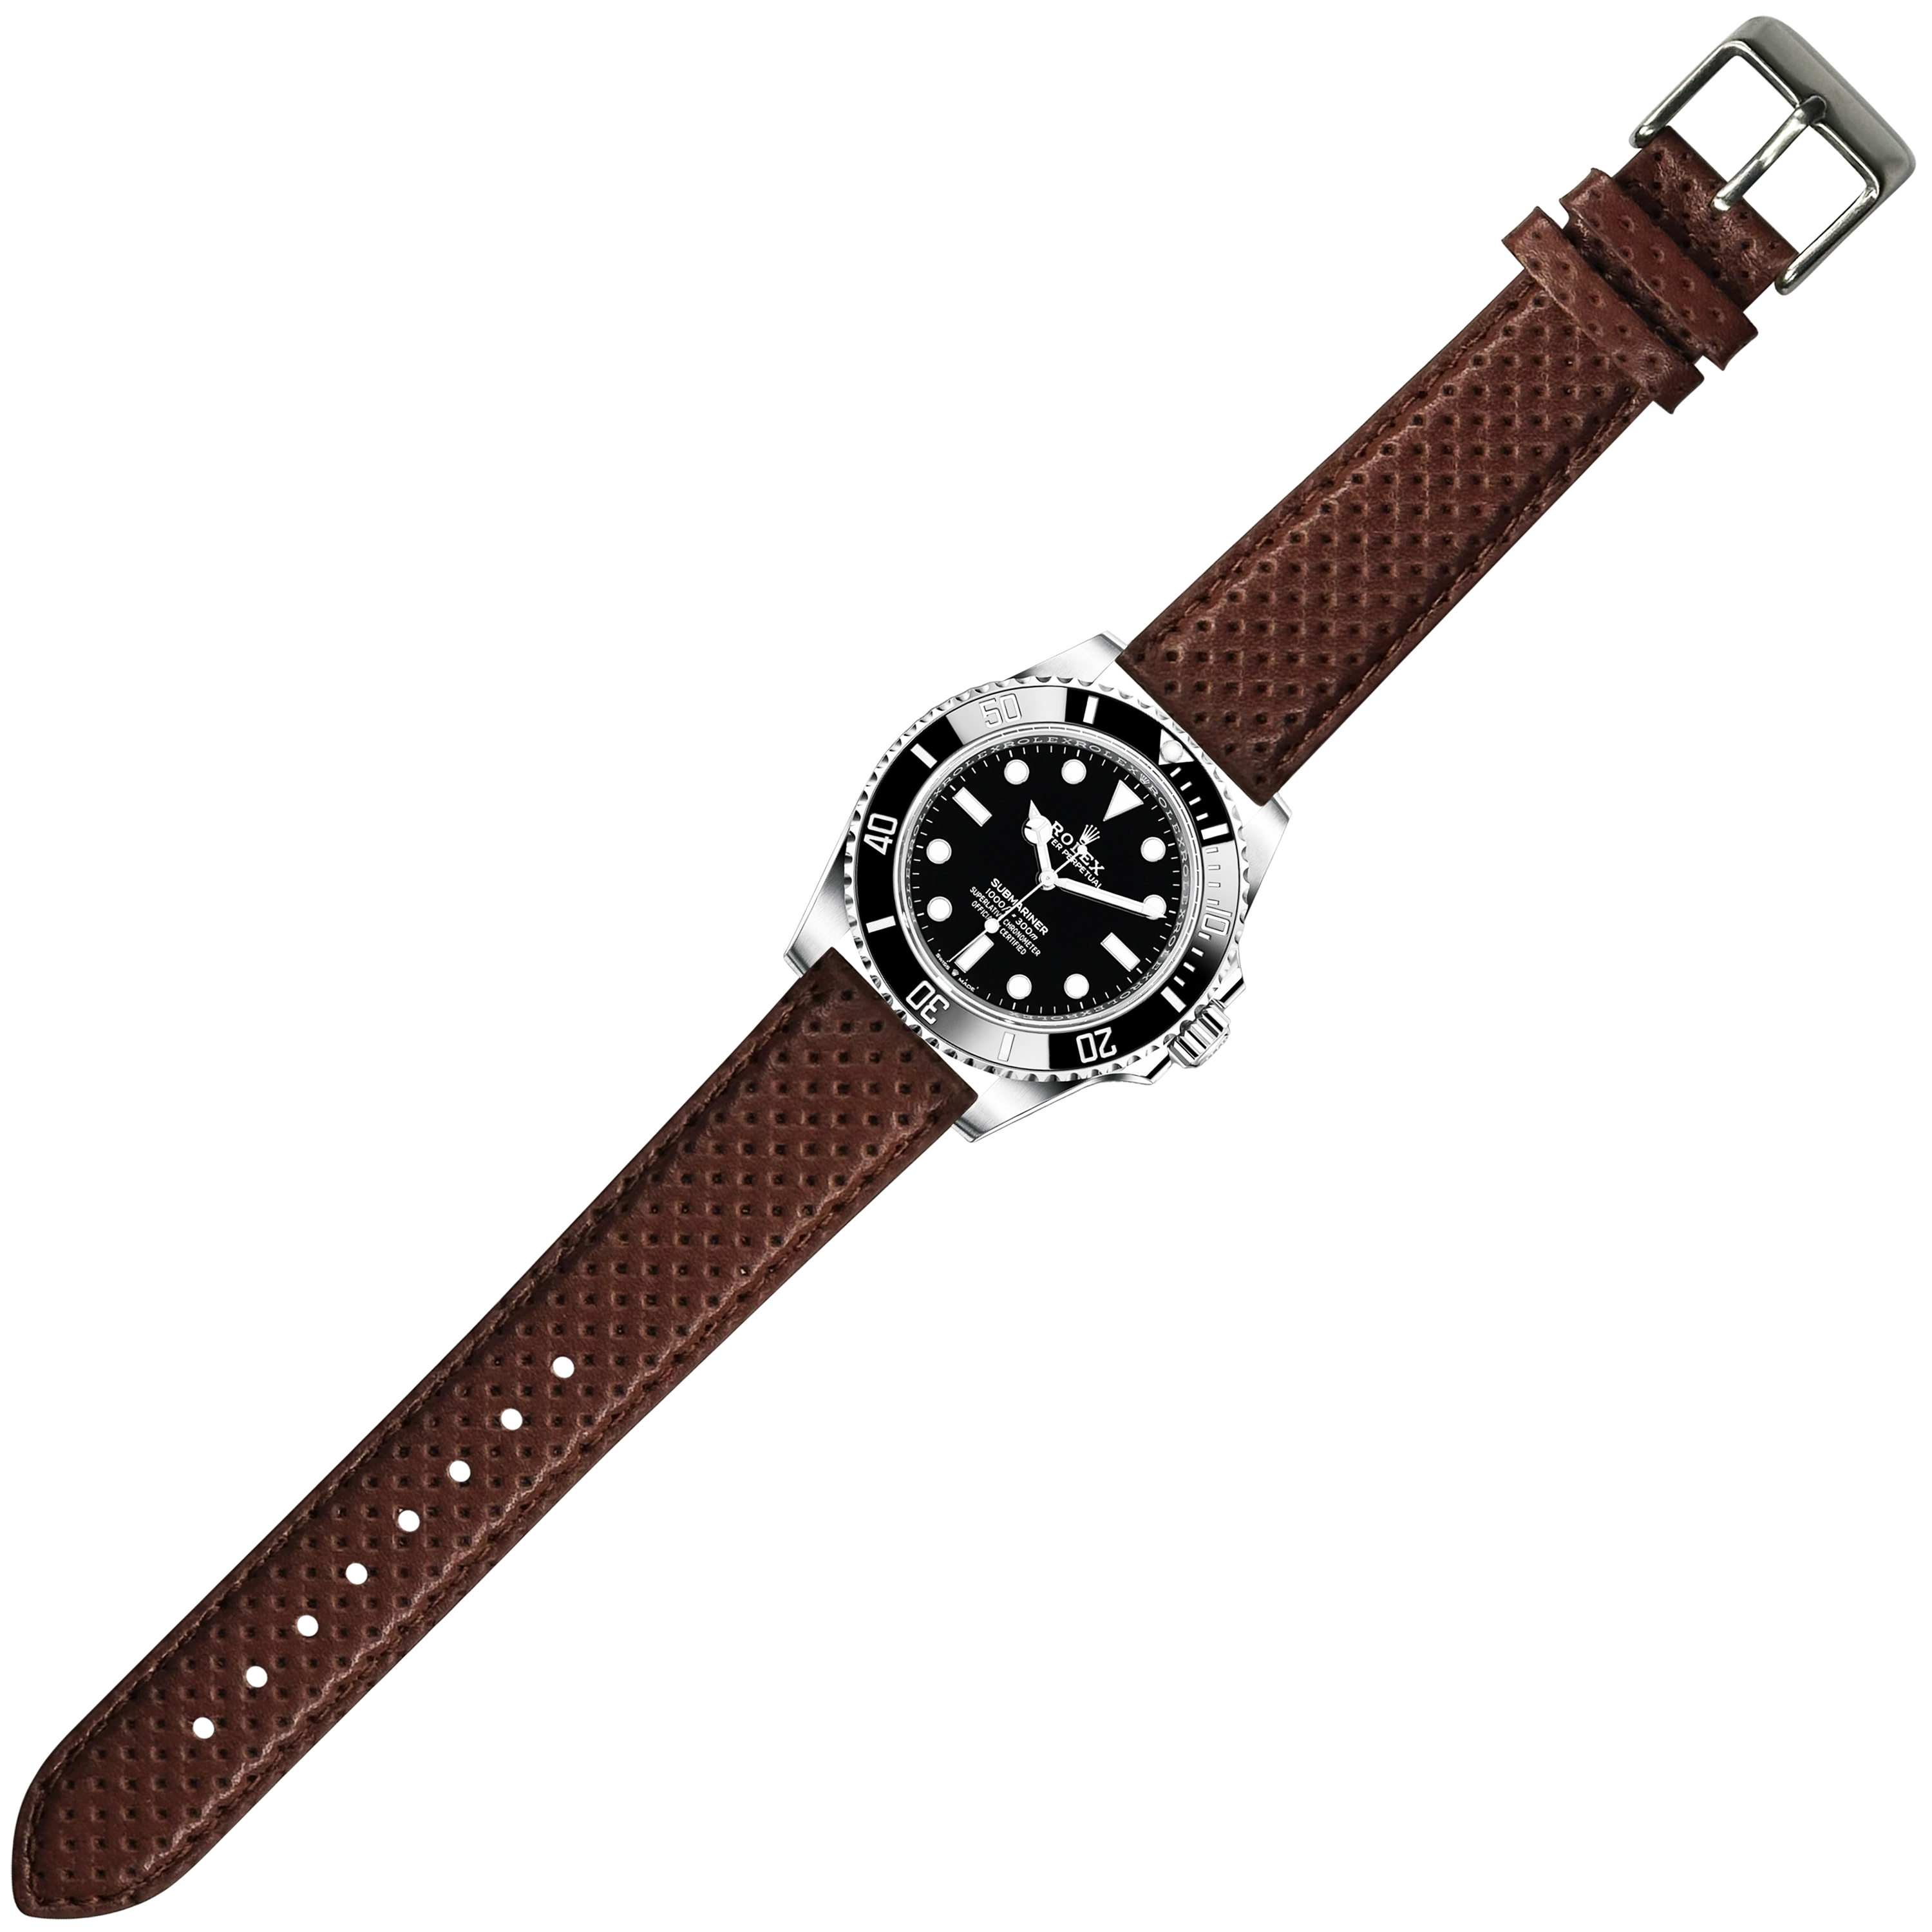 [Quick Release] Perforated Racing Leather Straps - Brown